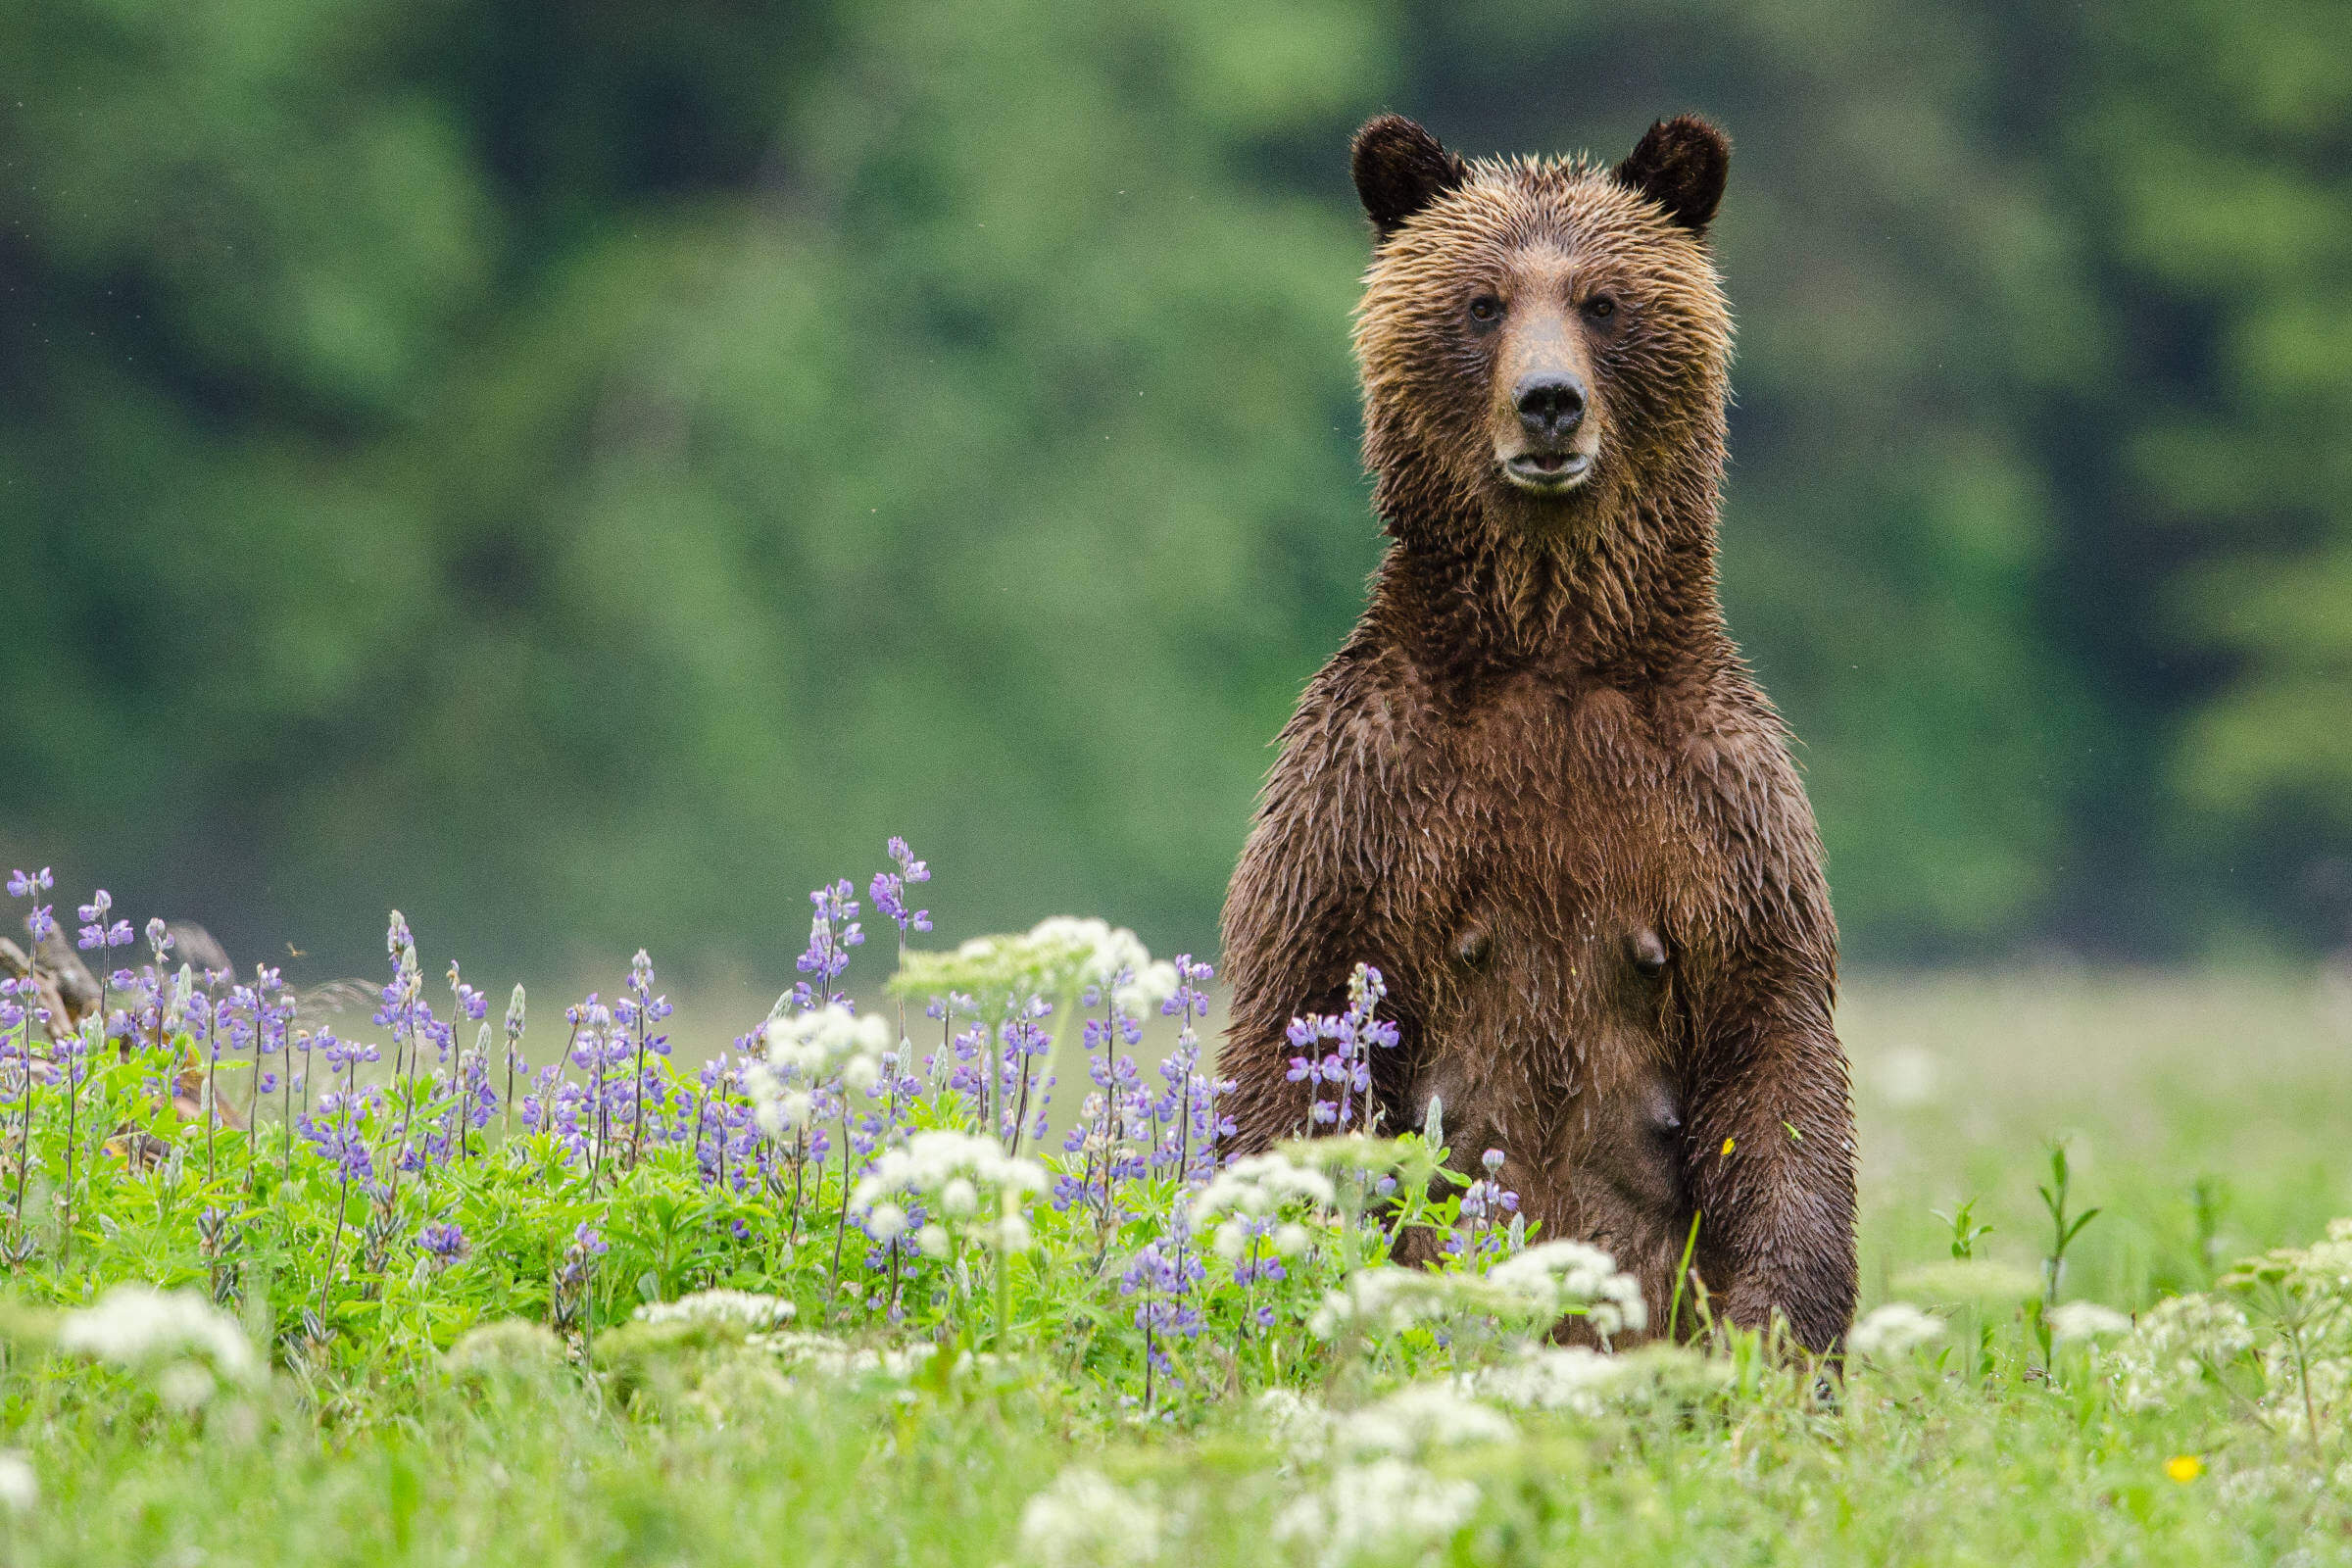 Great Bear Rainforest Grizzly Standing